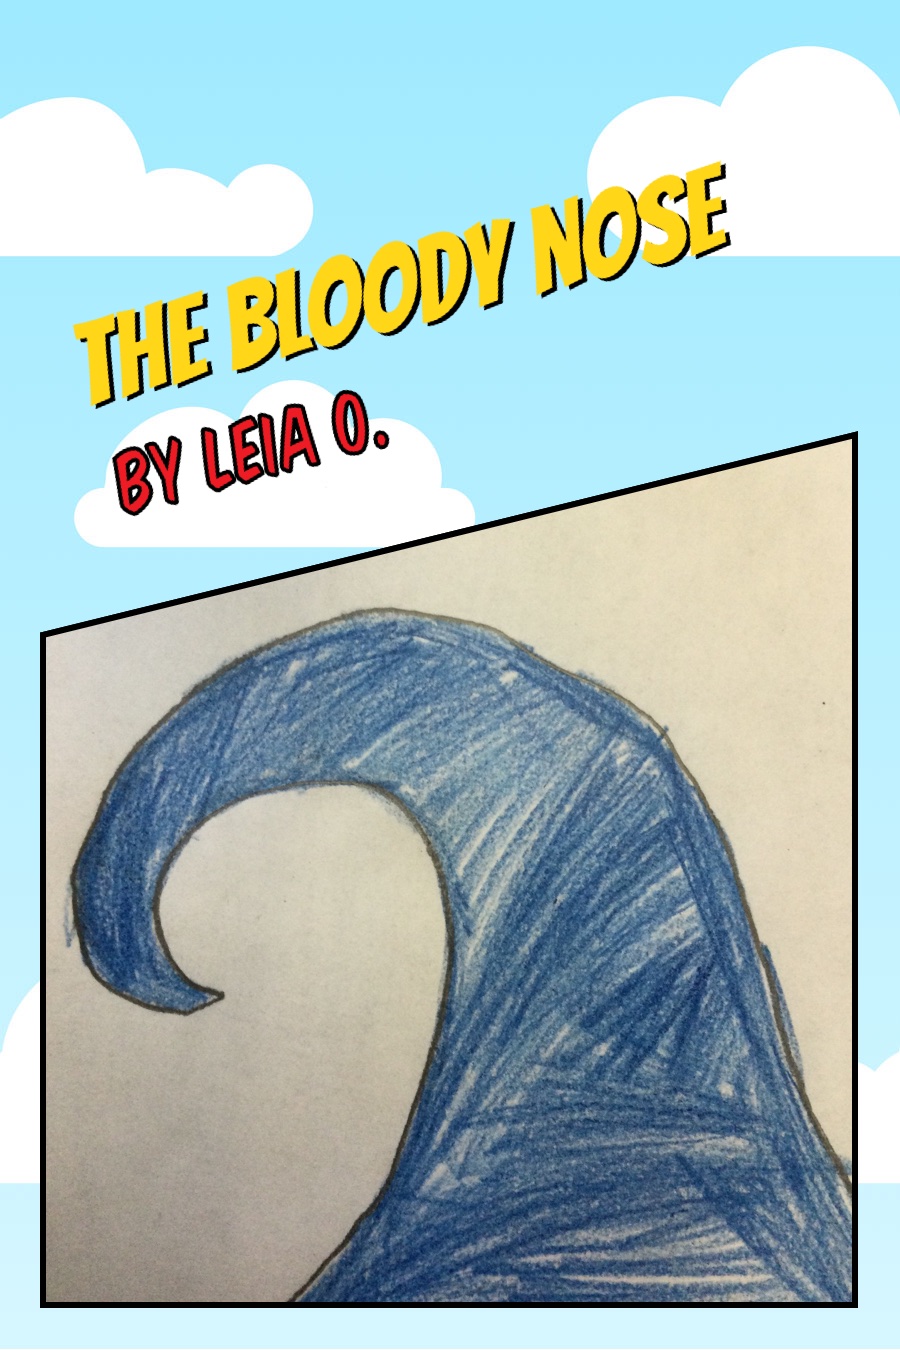 The Bloody Nose by Leia O